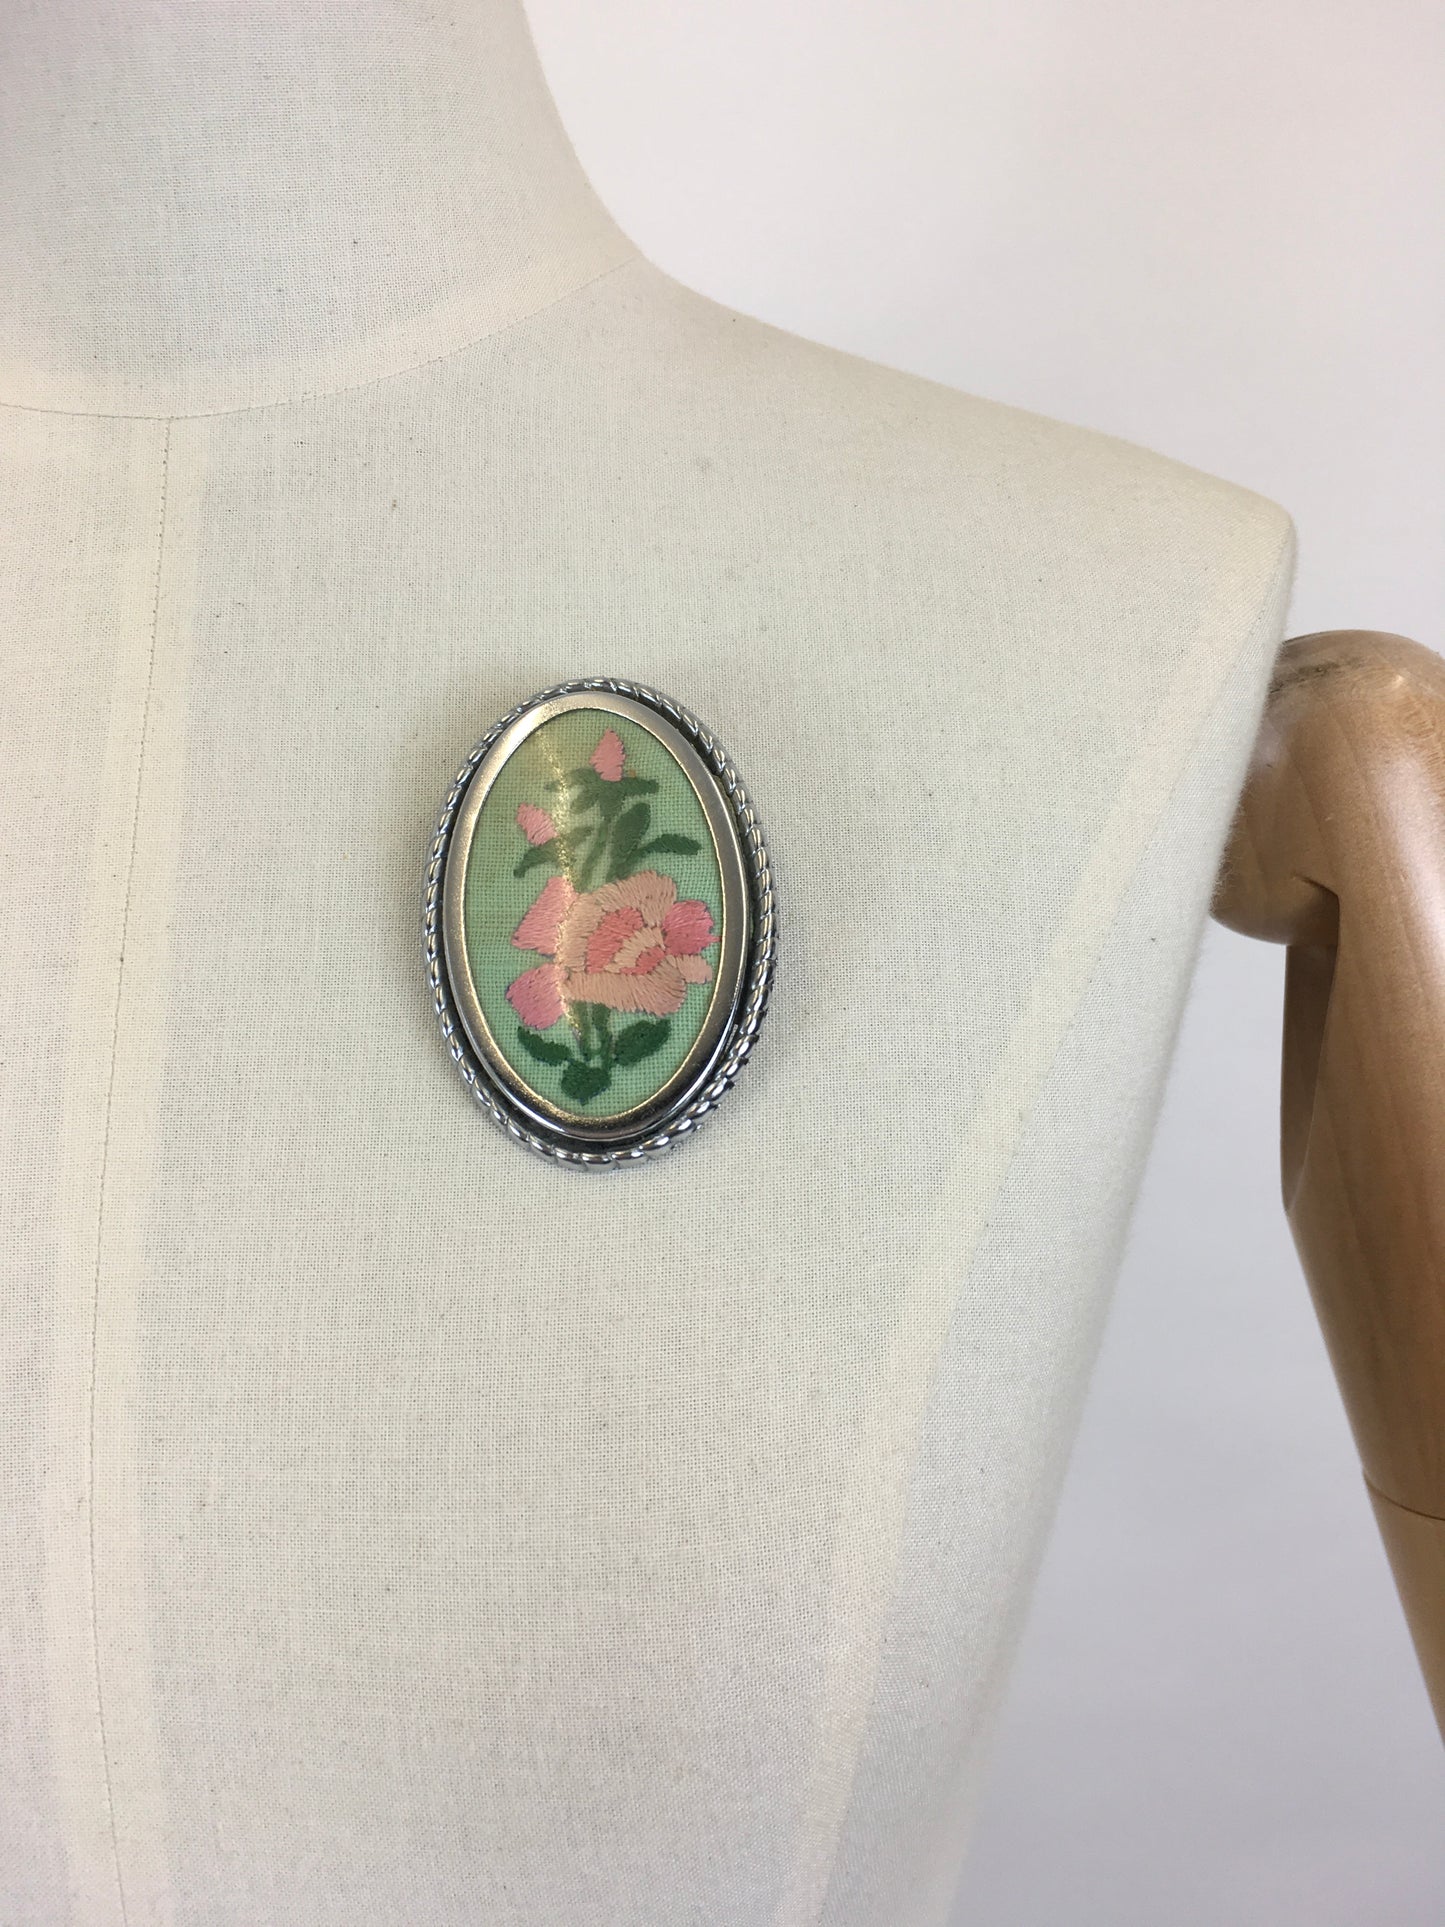 Original 1940’s / 1950’s Beautiful Floral Embroidered Brooch - In Springtime Touches of Pastel Pinks and Mint Green